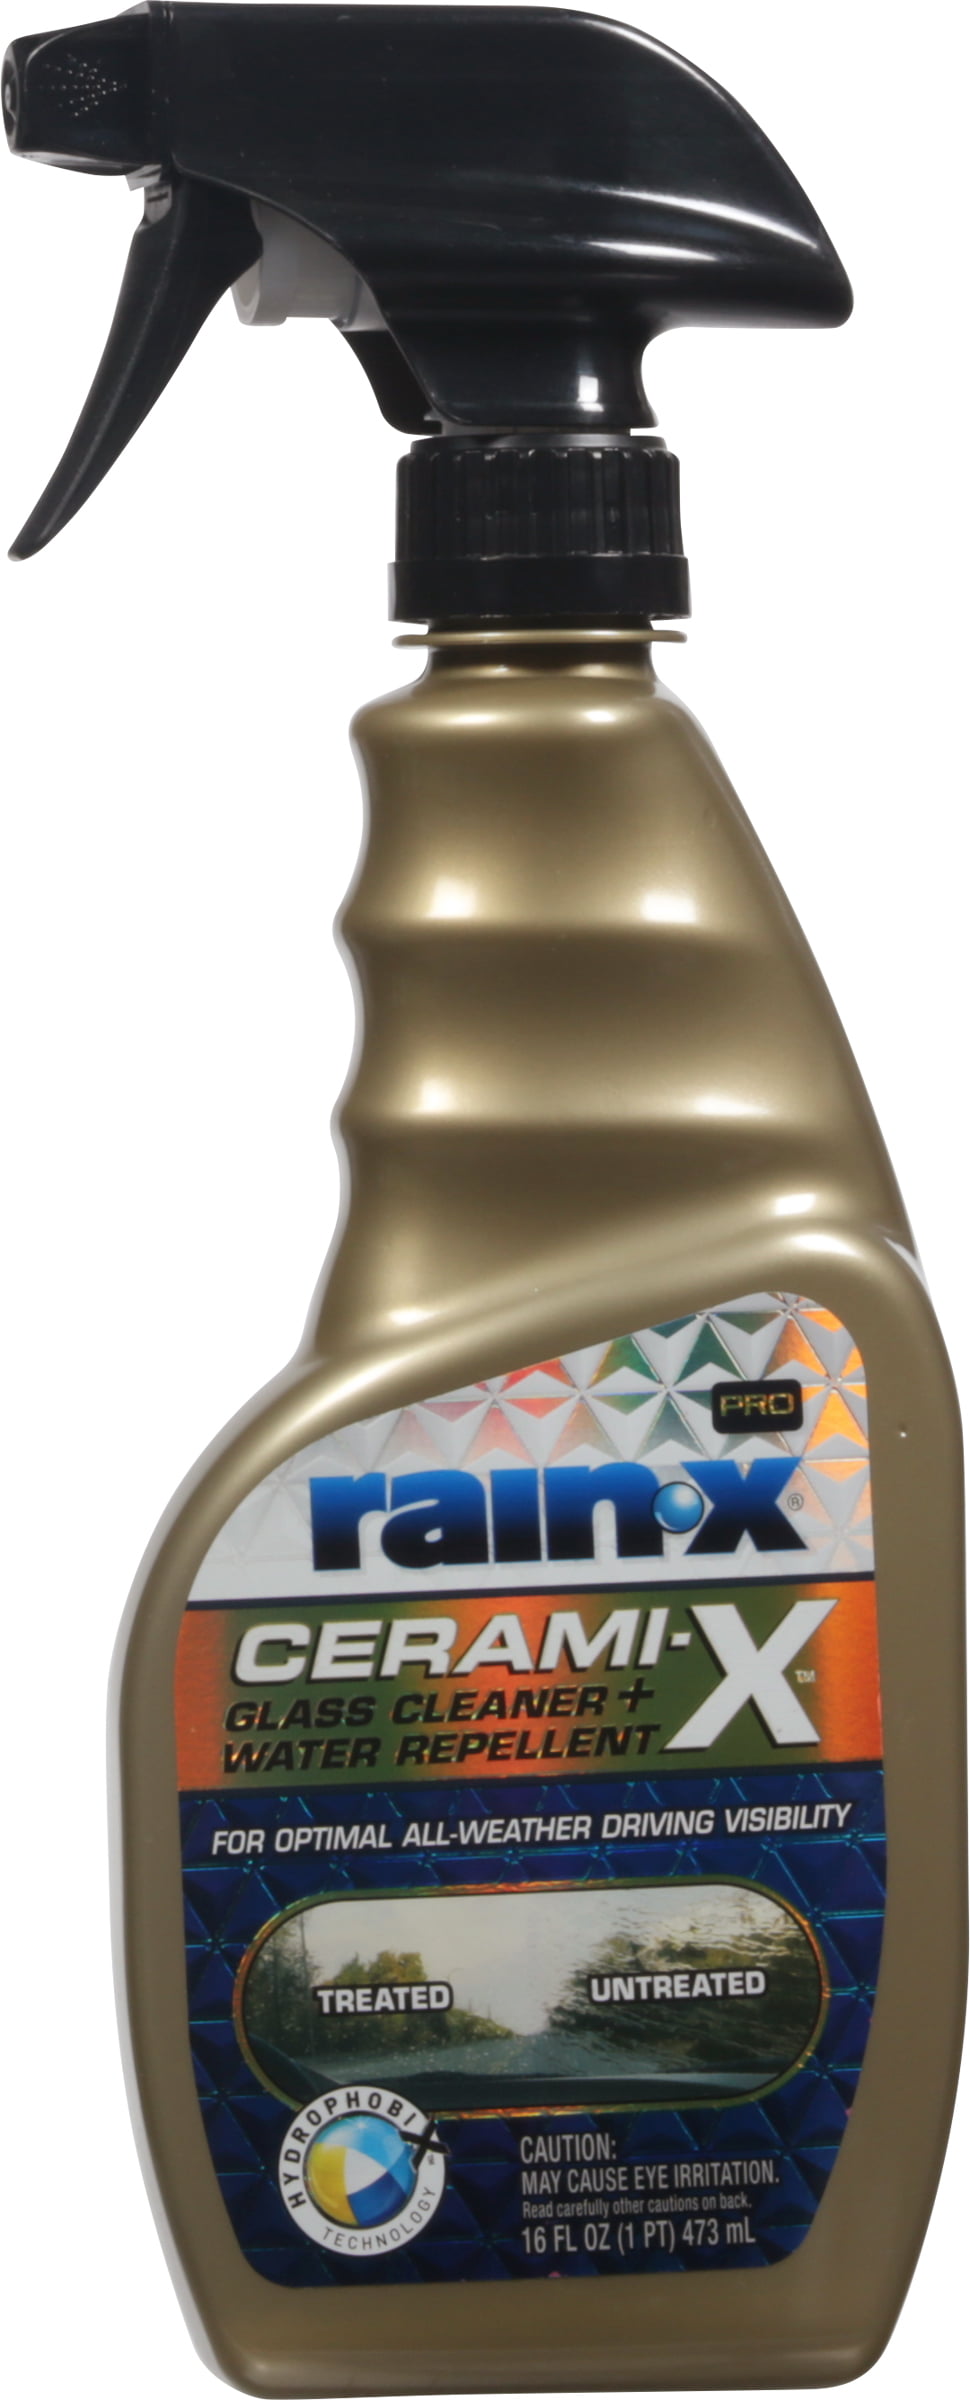 Rain-X Pro Cerami-X 16 Ounce Glass Cleaner And Water Repellent 630178